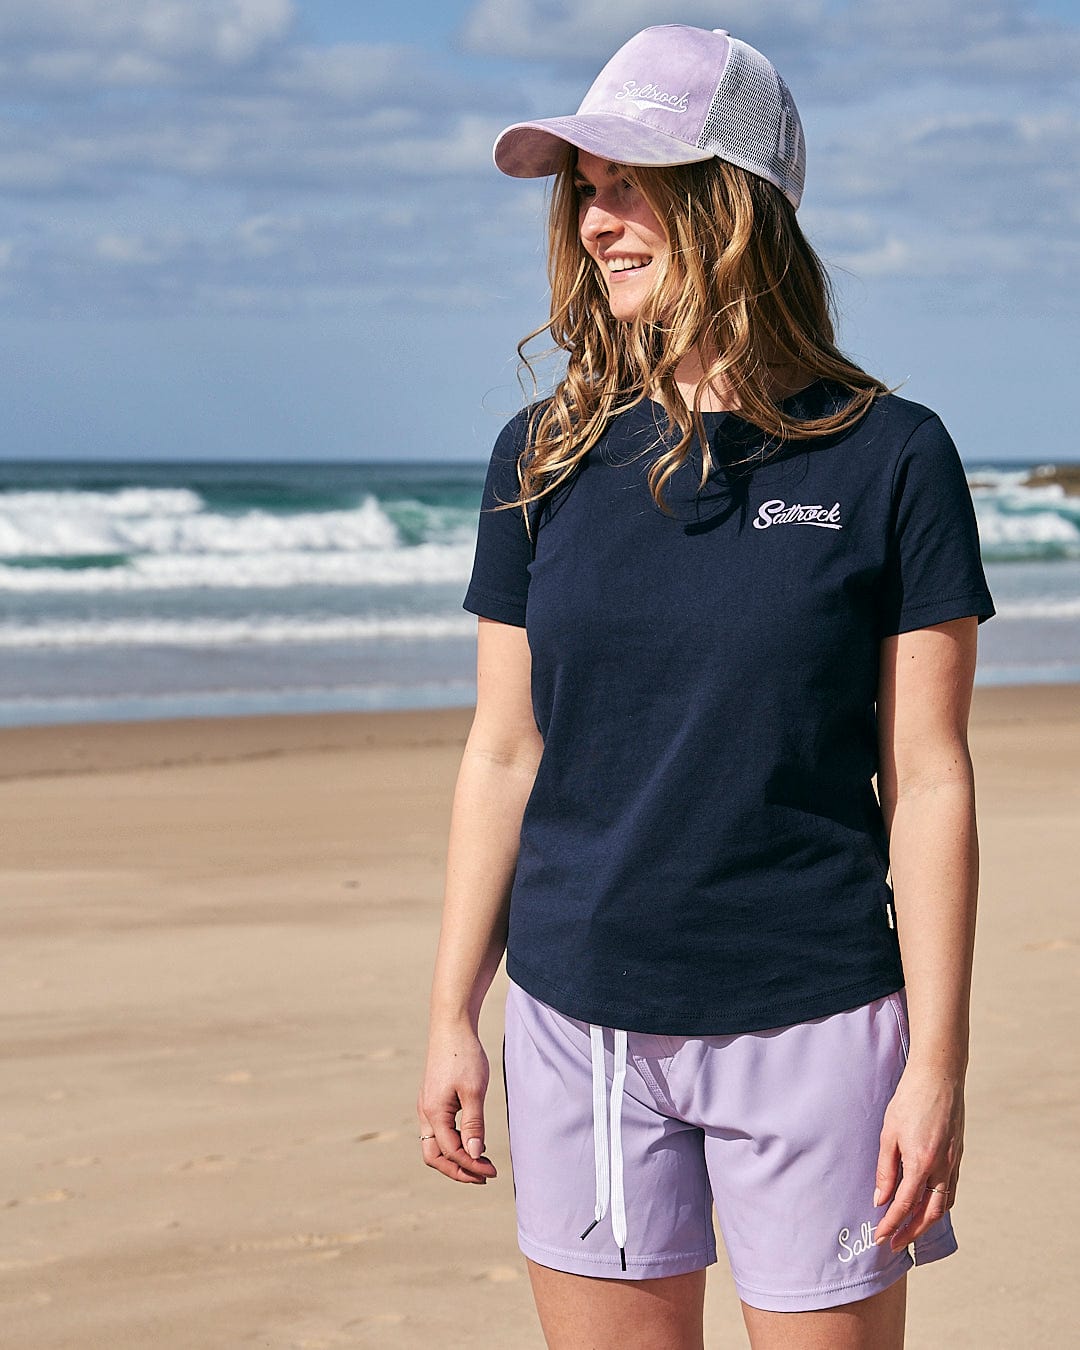 A woman is standing on the beach wearing a Saltrock Trademark Womens Short Sleeve T-Shirt in Navy and shorts.